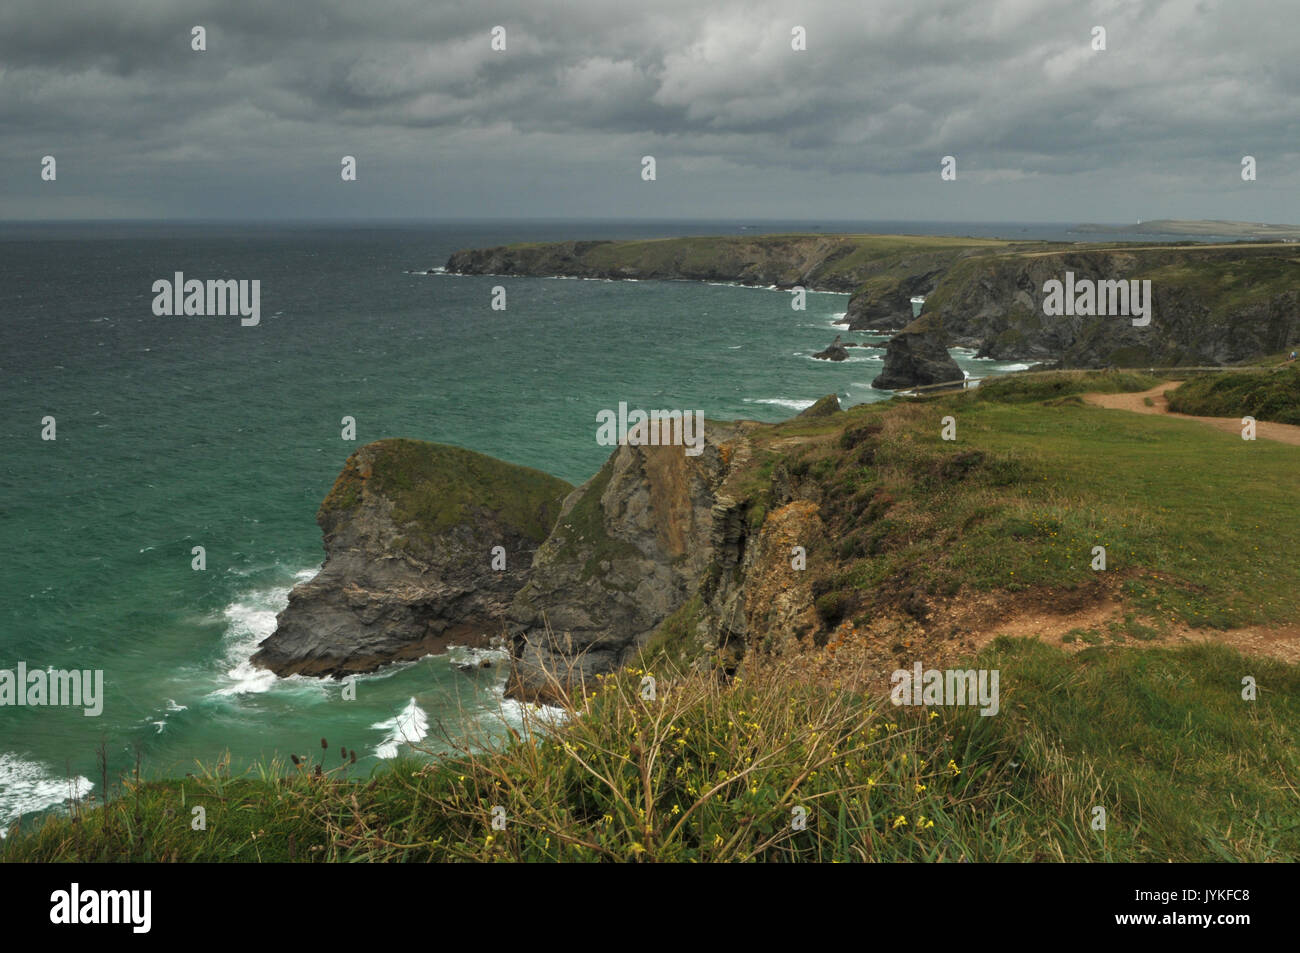 the rocks and sea at bedruthan steps national trust land or site in north cornwall showing moody slies sky and rugged coastline with surf and rocky Stock Photo